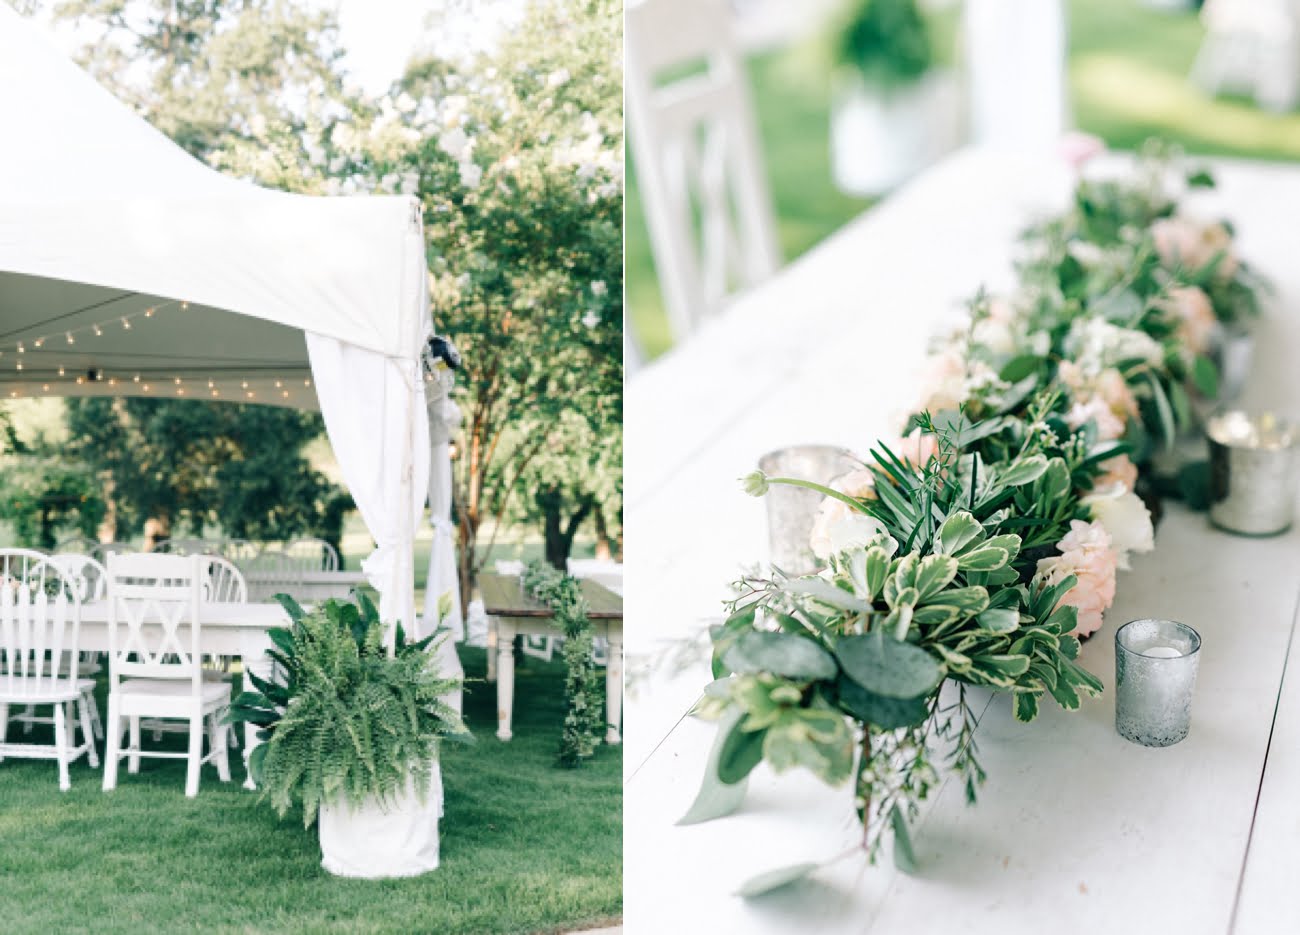 Flowers and plants for tented wedding in Tuscaloosa, AL